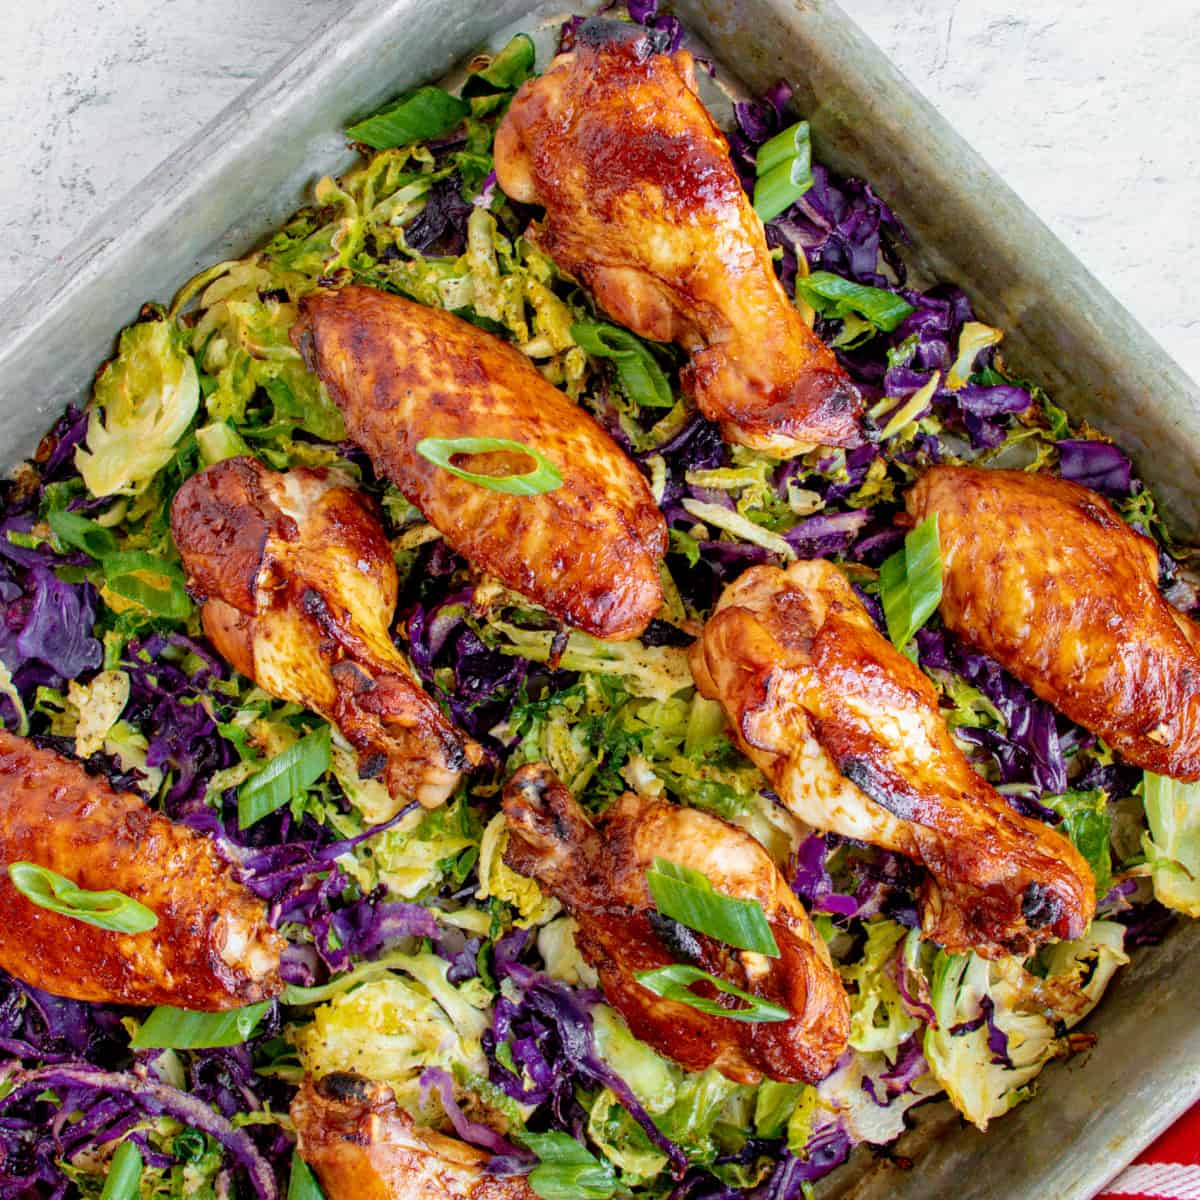 Overhead of Baked Chicken Wings on Brussels sprouts and red cabbage.